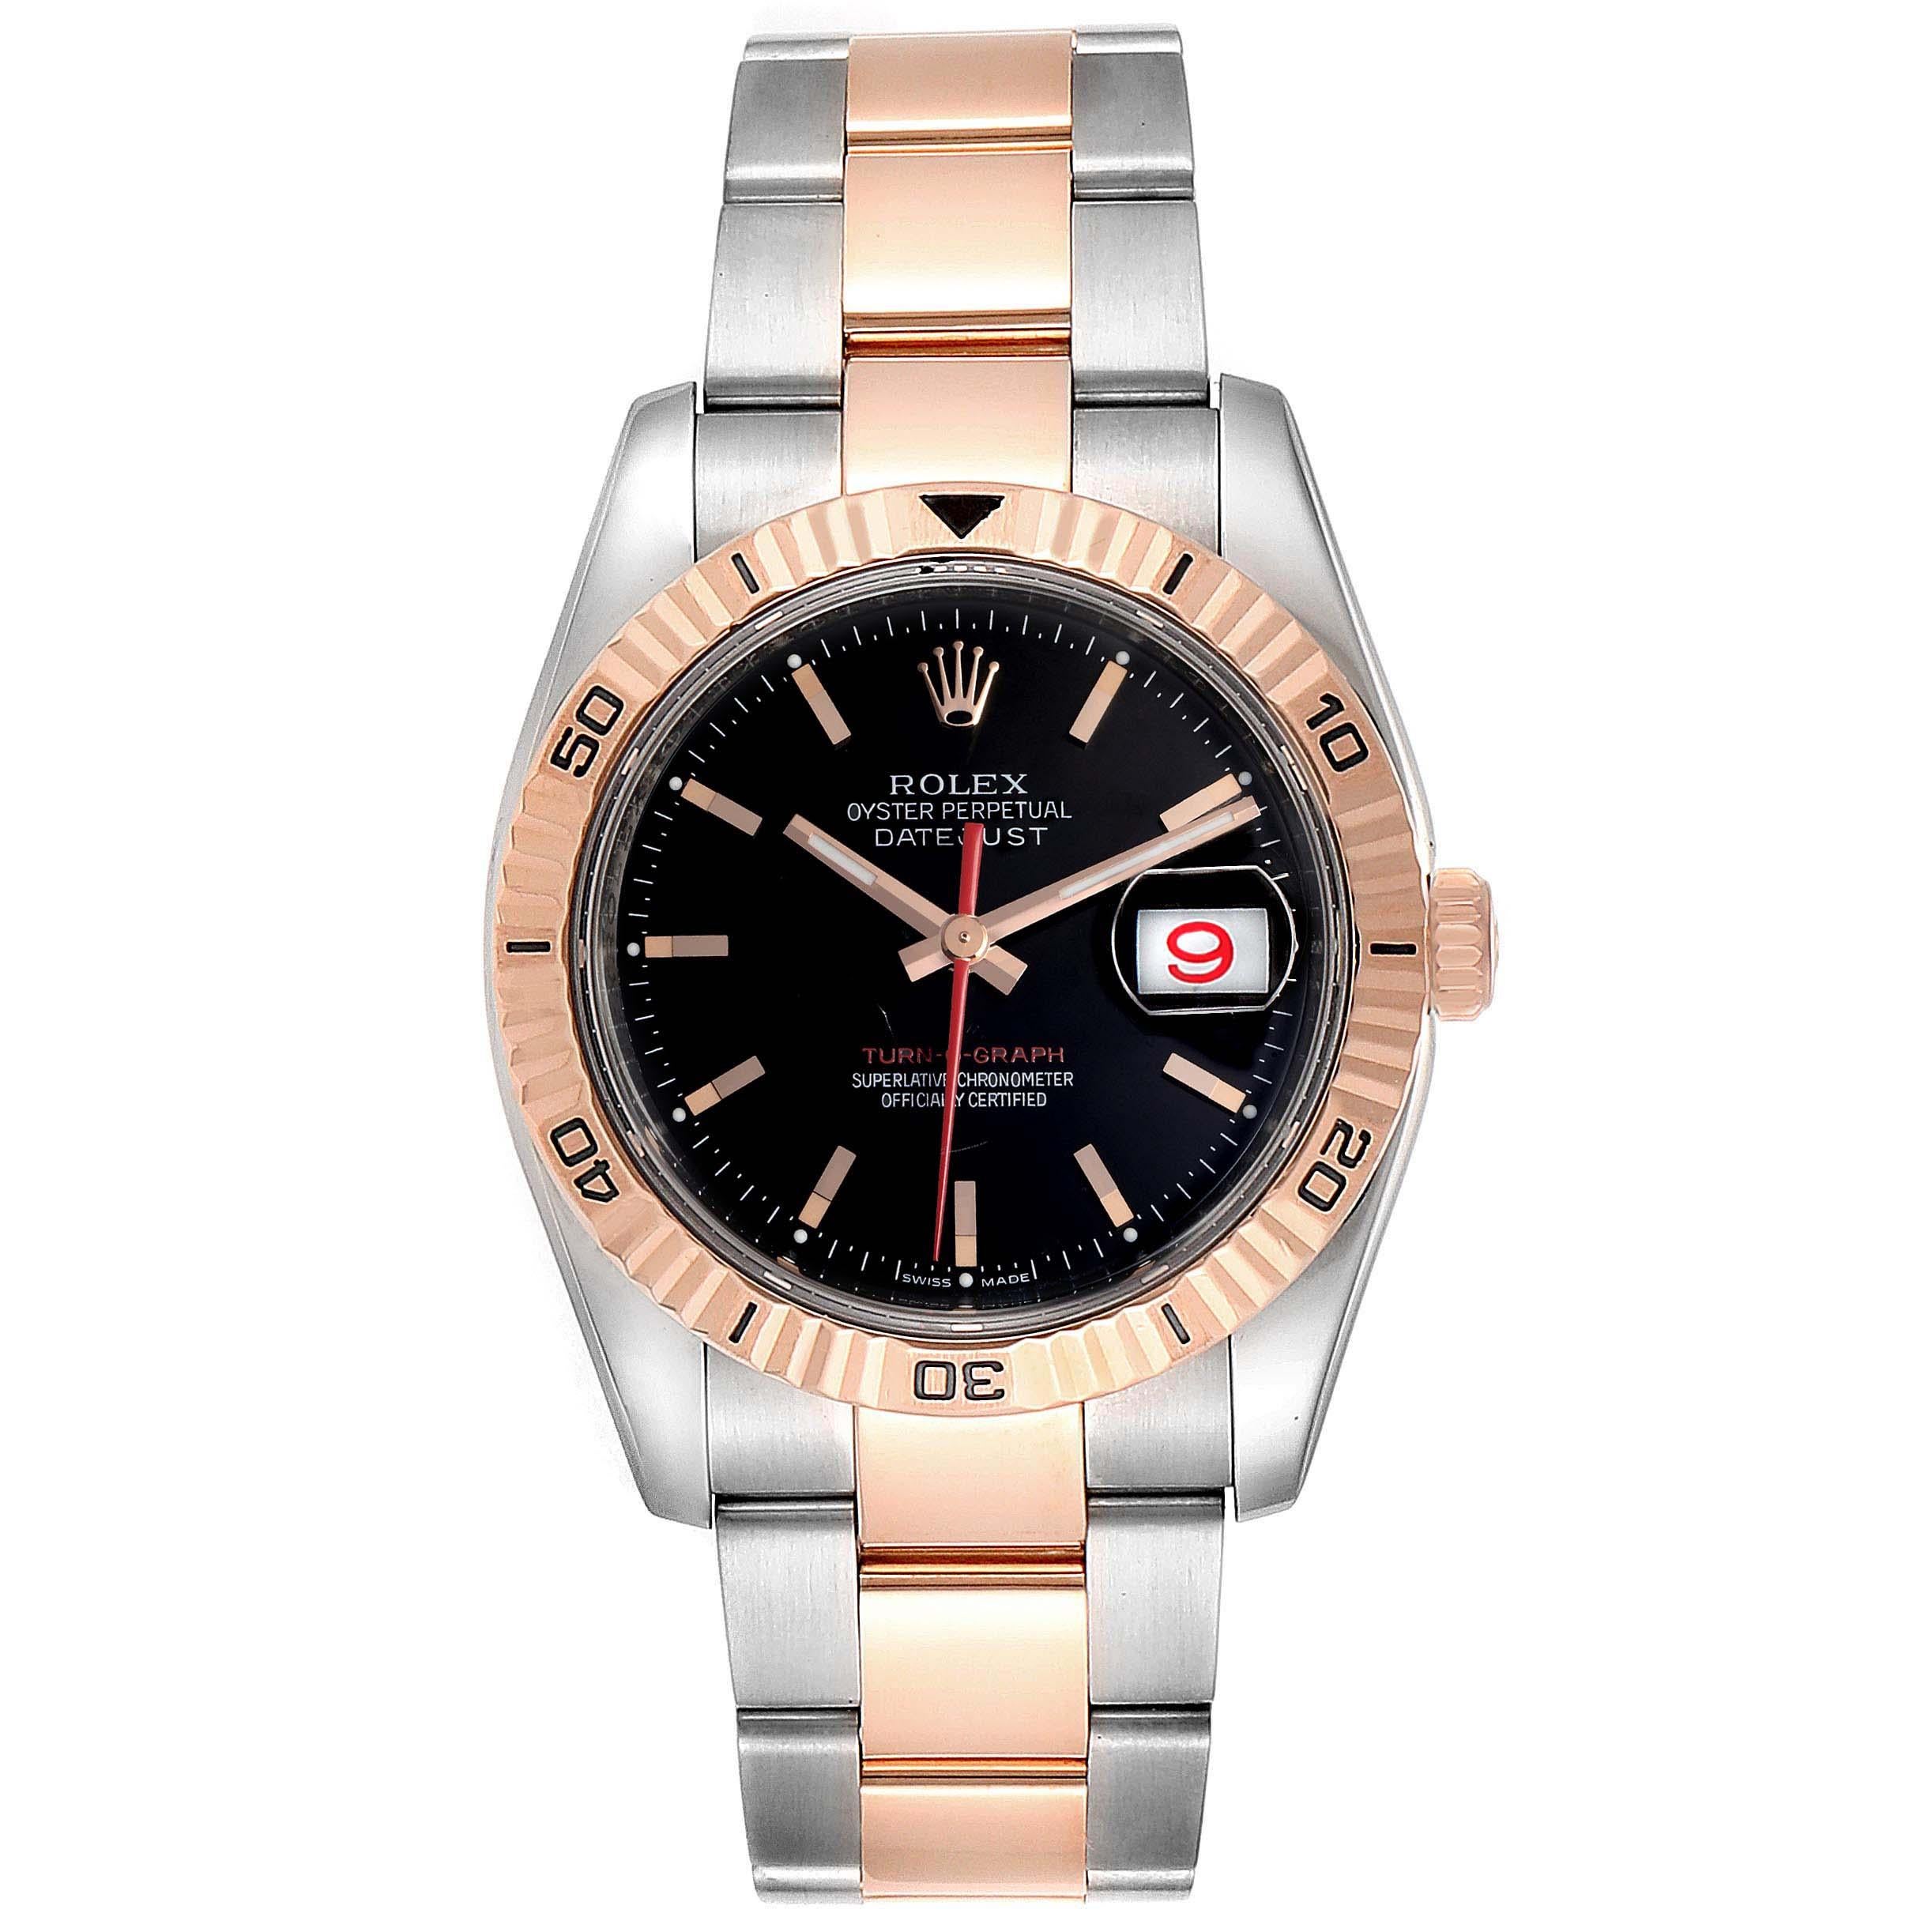 Rolex Turnograph Datejust Steel Rose Gold Mens Watch 116261 Box Papers. Officially certified chronometer self-winding movement. Stainless steel case 36.0 mm in diameter. Rolex logo on a crown. 18k rose gold fluted bidirectional rotating turnograph